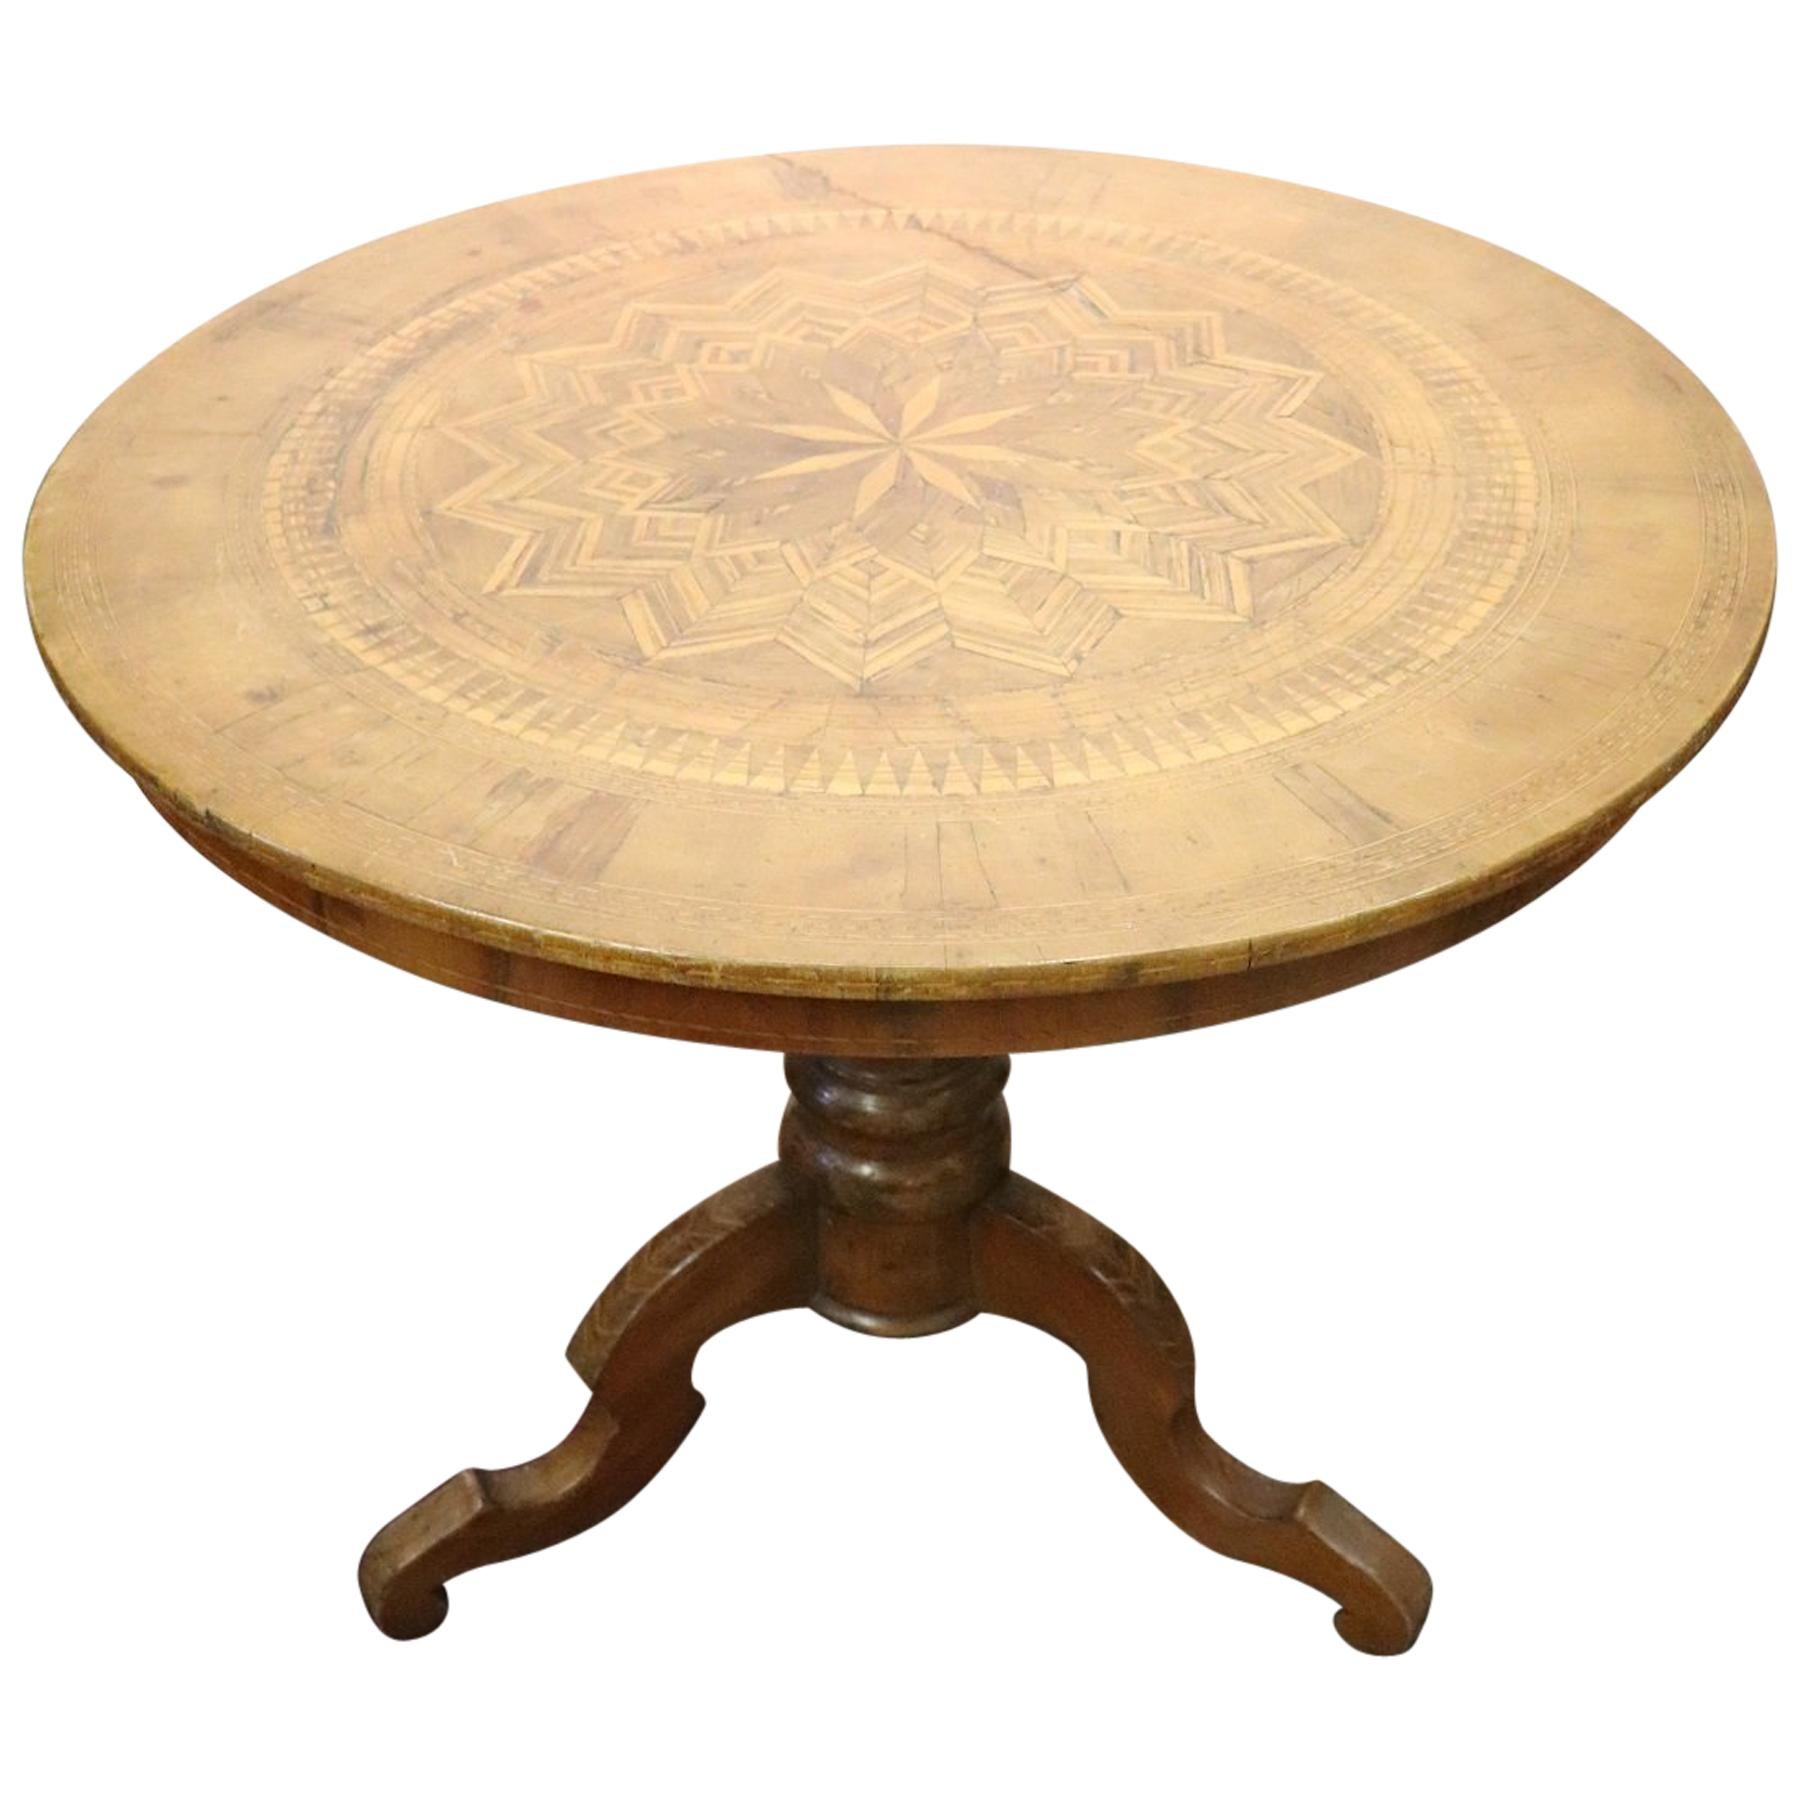 19th Century Italian Louis Philippe Walnut Inlay Center Table or Pedestal Table